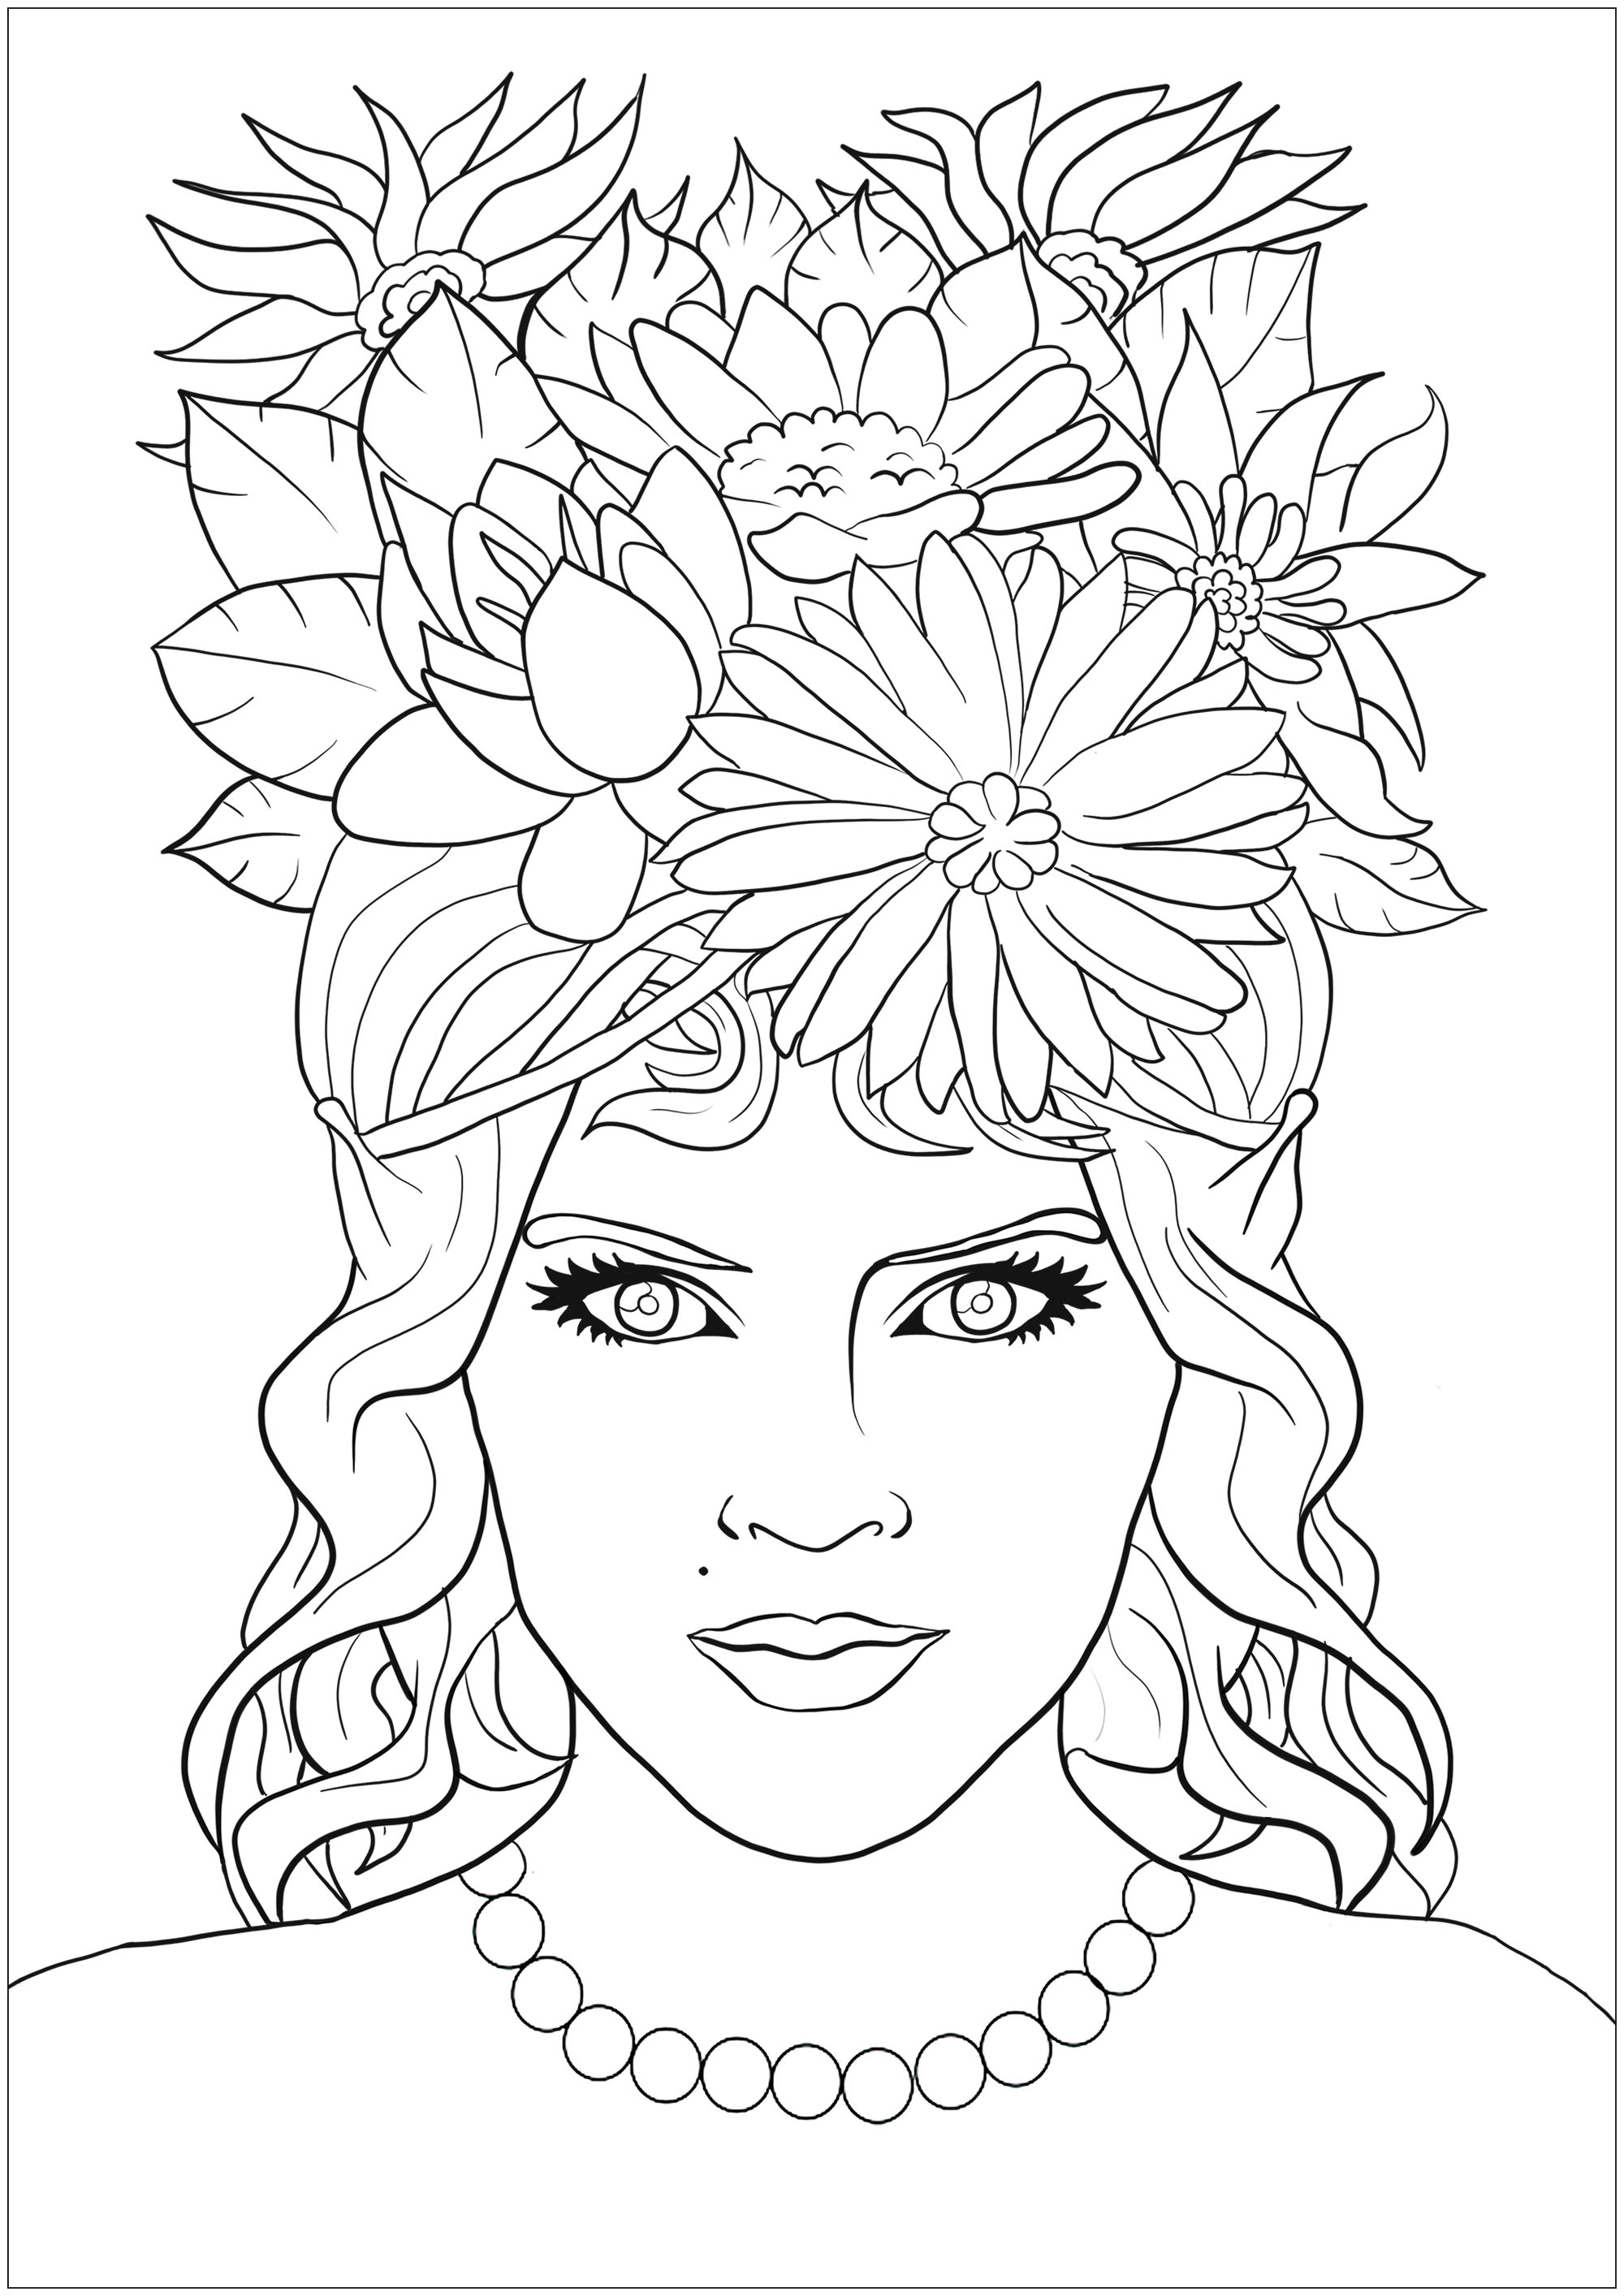 Elf woman with flowered hair   Anti stress Adult Coloring Pages